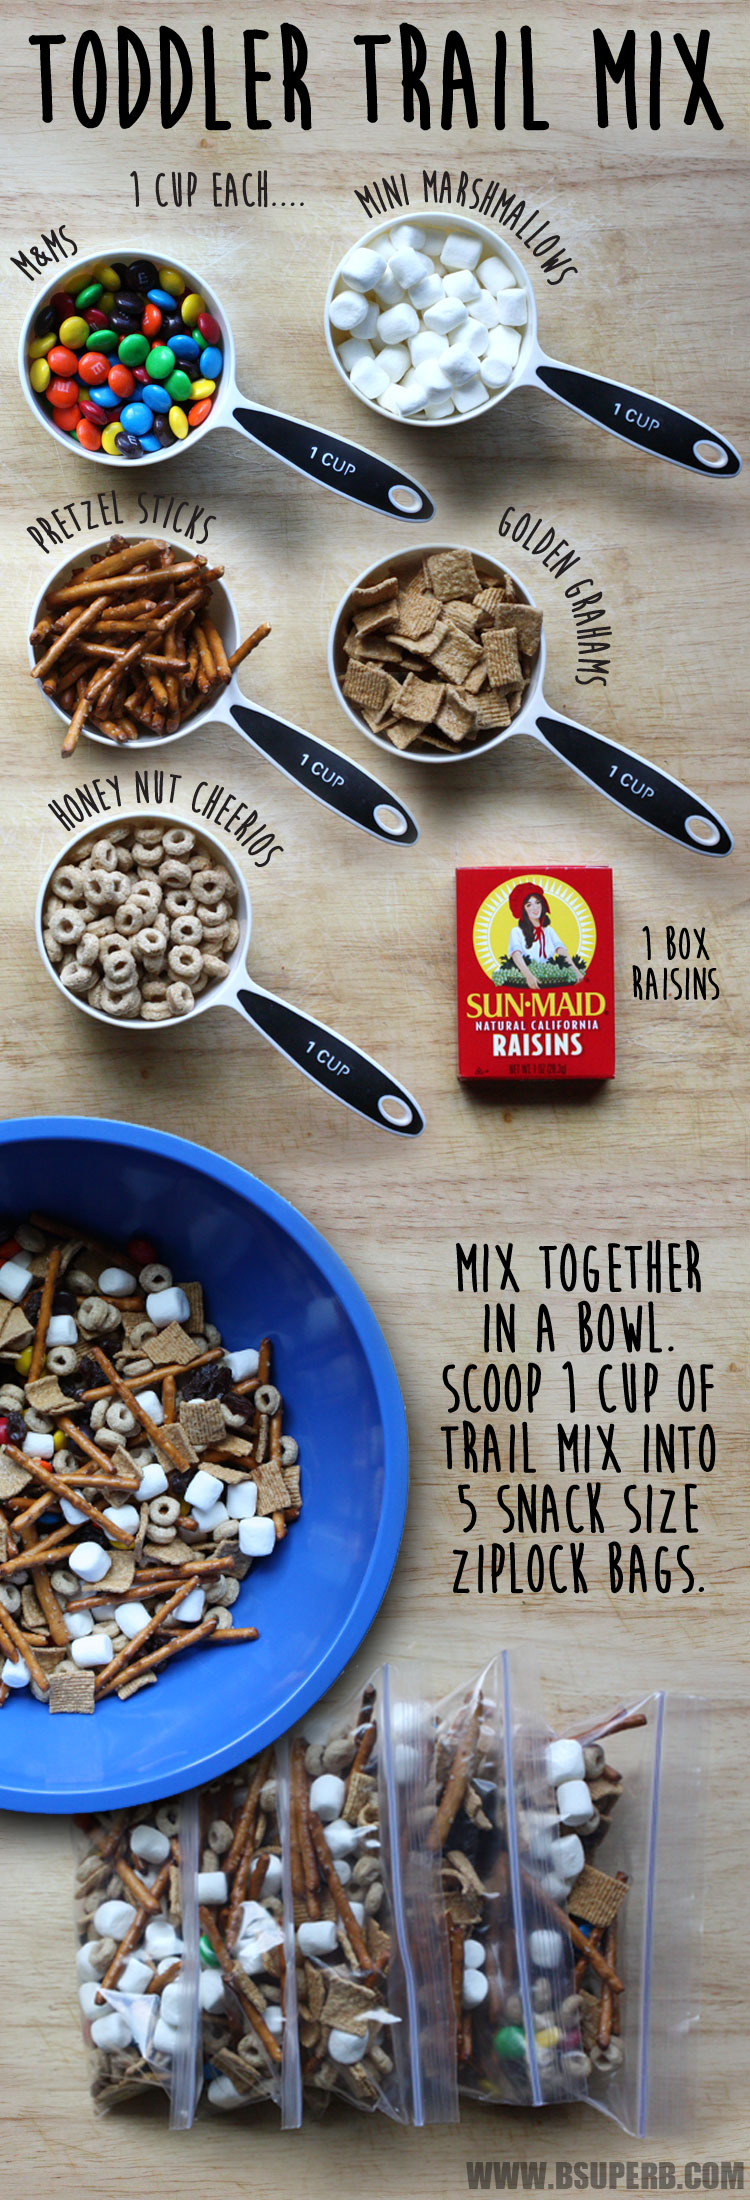 Toddler Trail Mix - quick and easy recipe that your kiddos will love